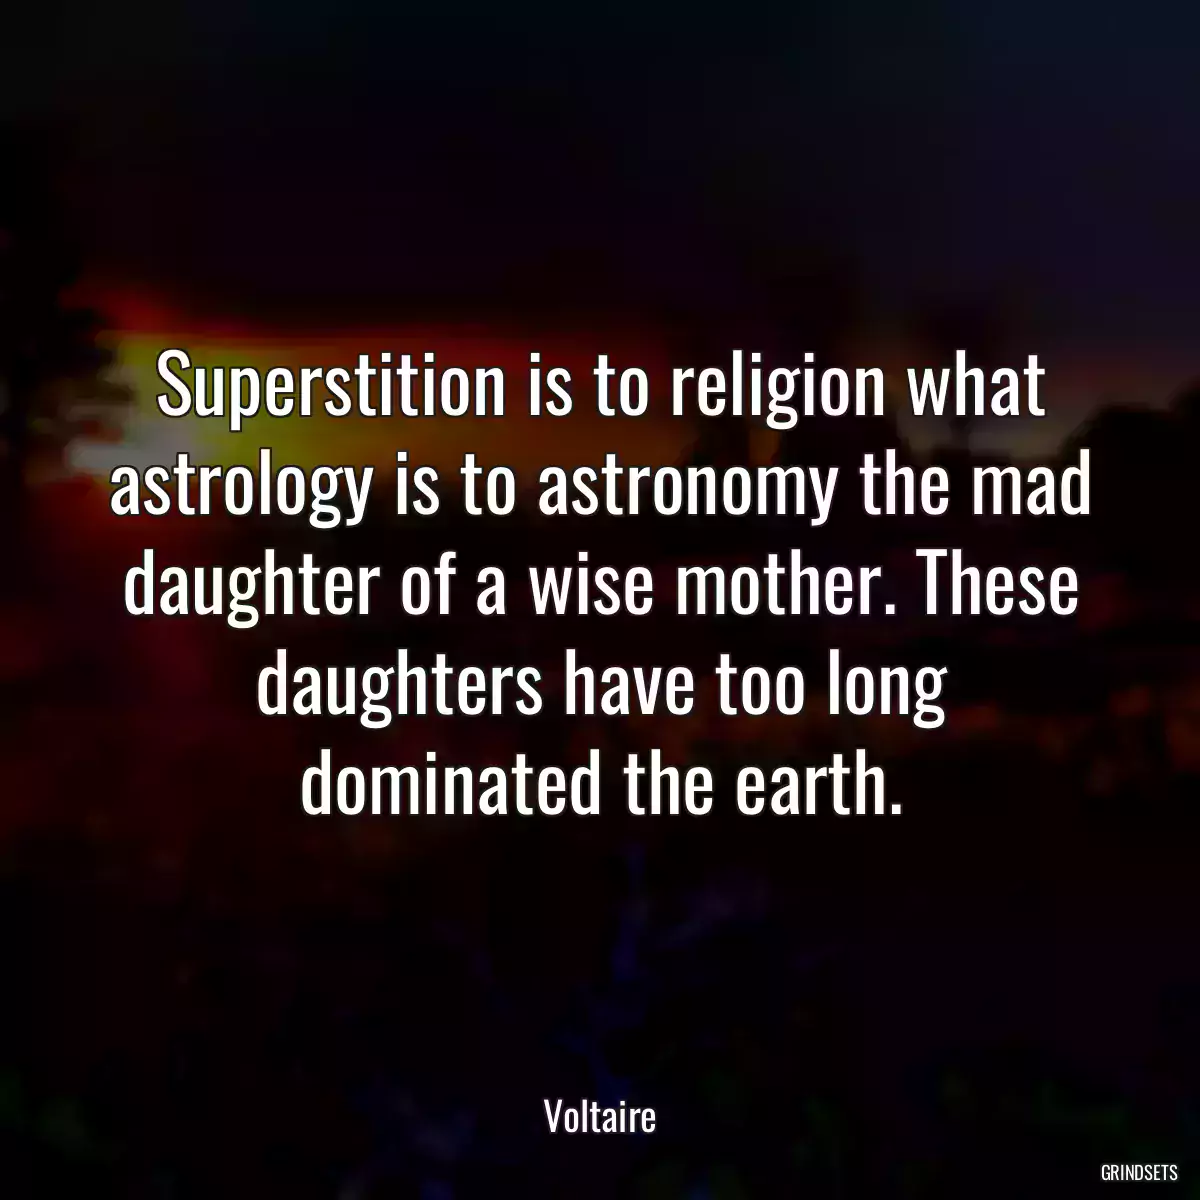 Superstition is to religion what astrology is to astronomy the mad daughter of a wise mother. These daughters have too long dominated the earth.